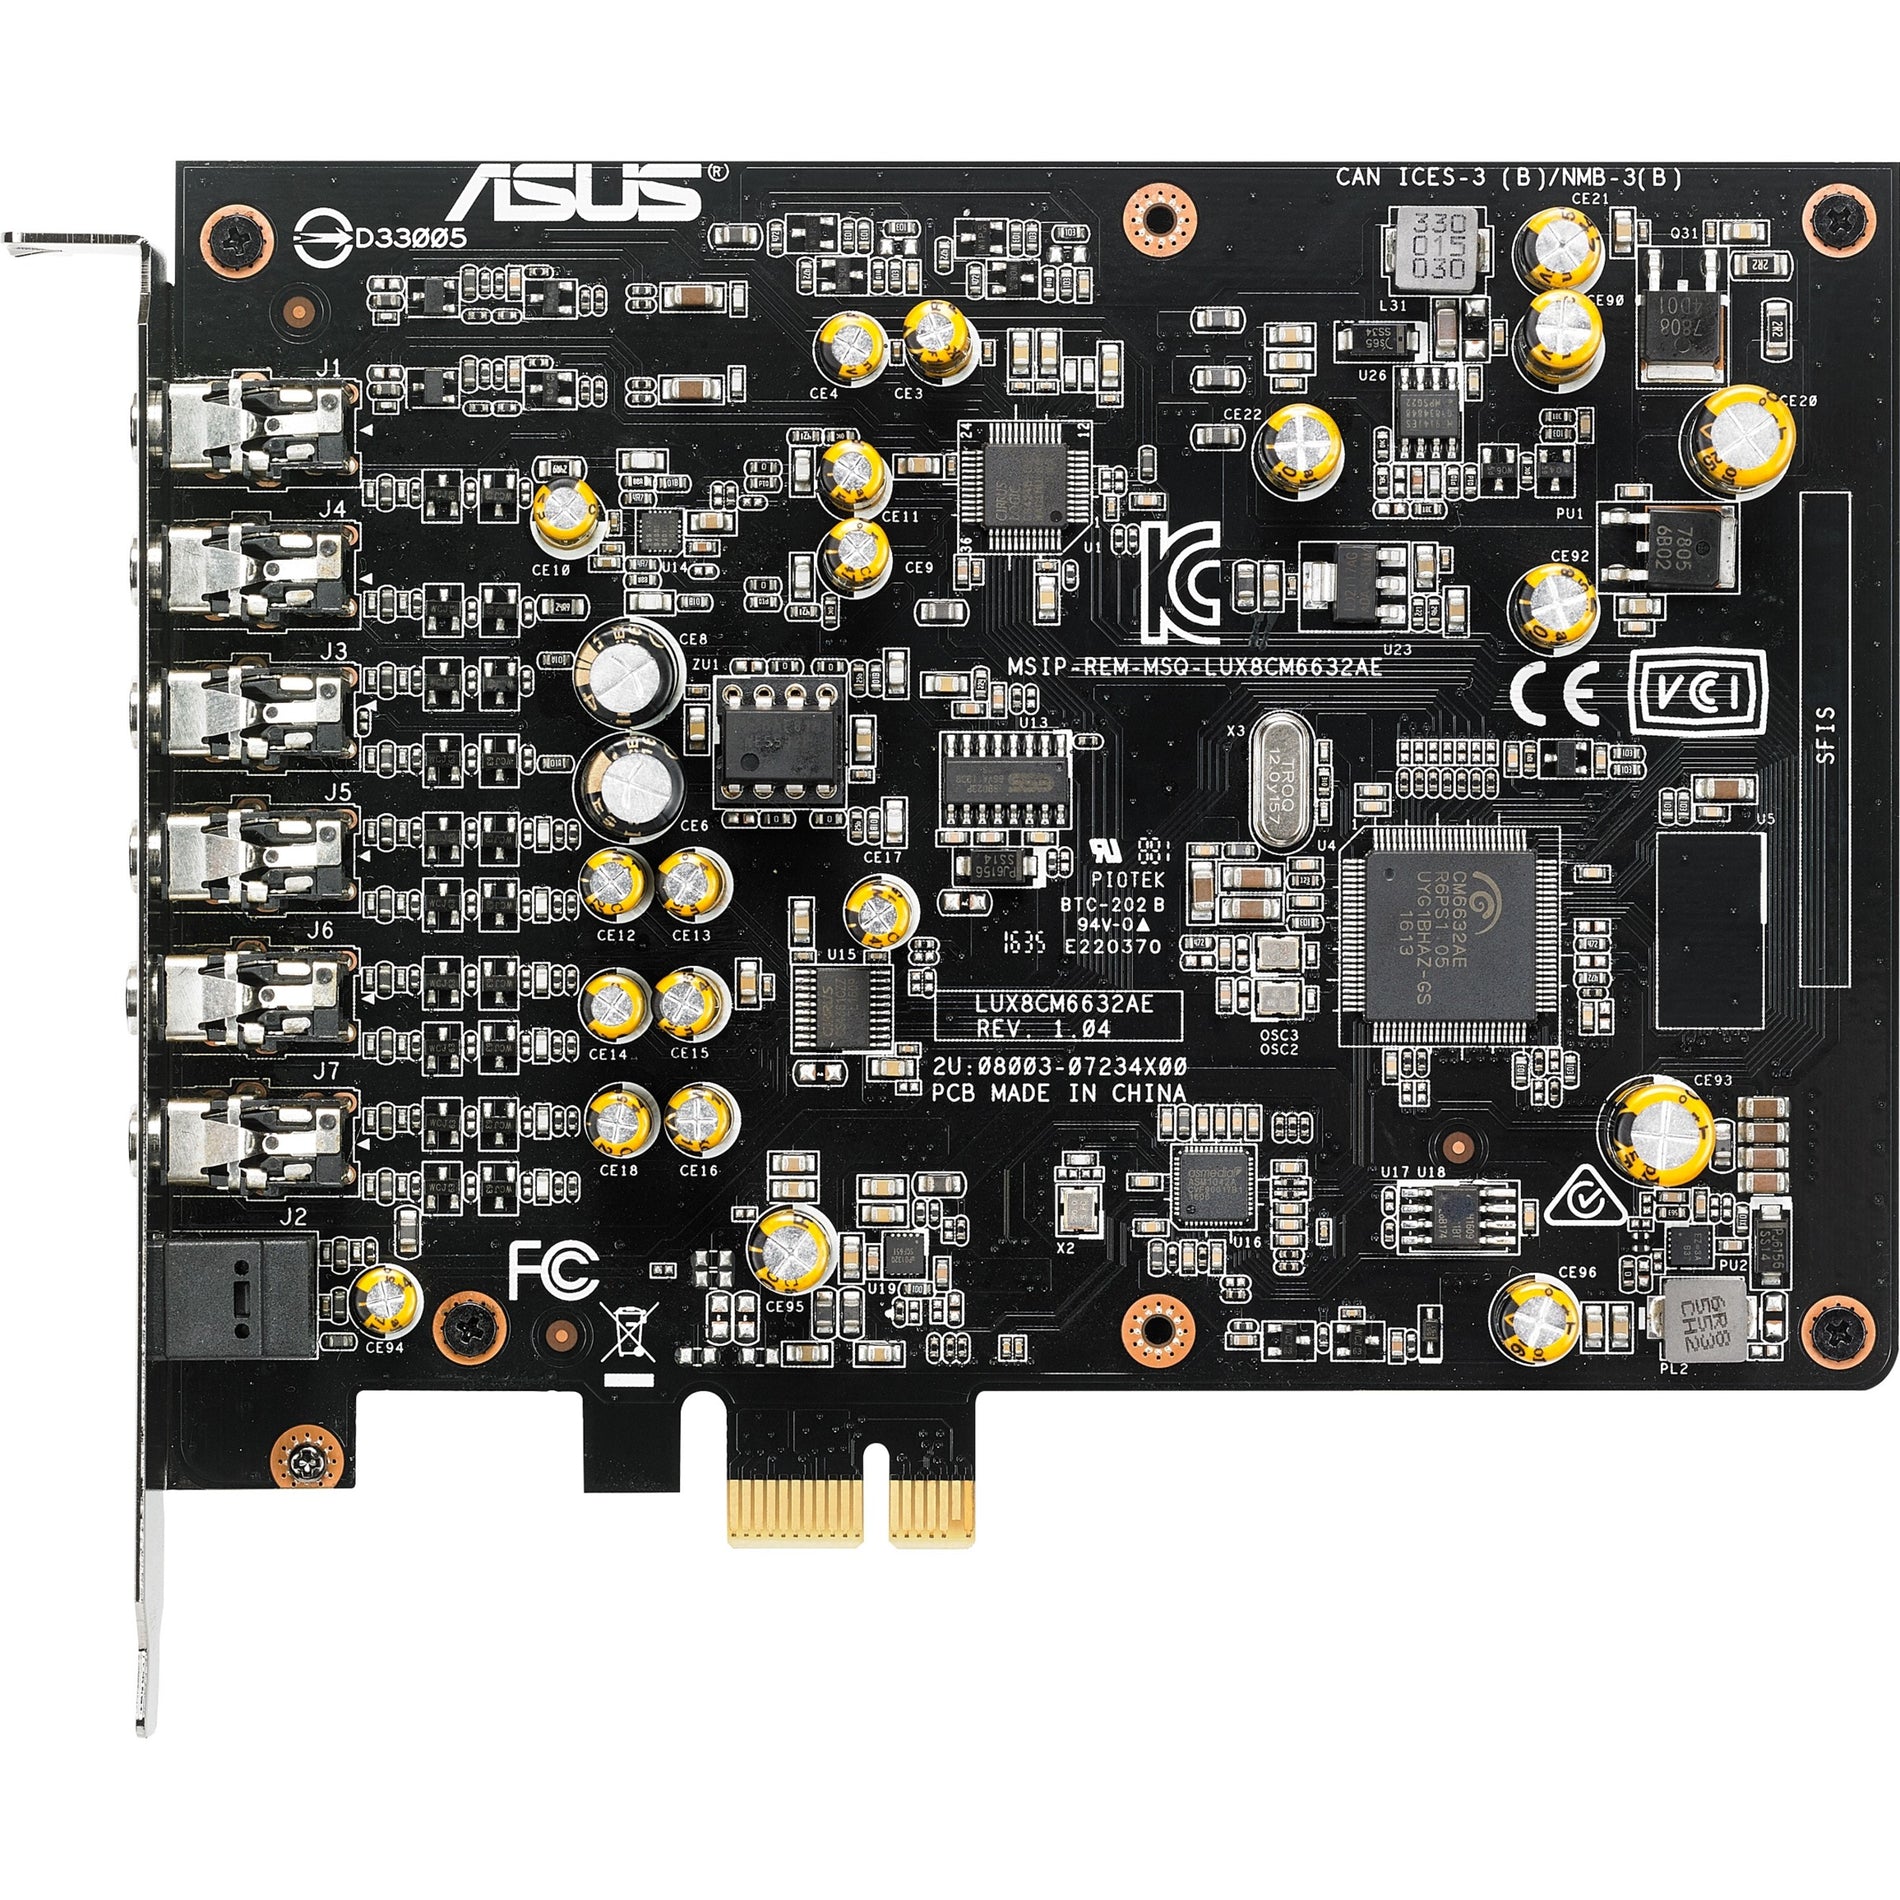 Asus XONAR AE PCIe 7.1 Gaming Audio Card, Enhanced Sound Quality for Immersive Gaming Experience